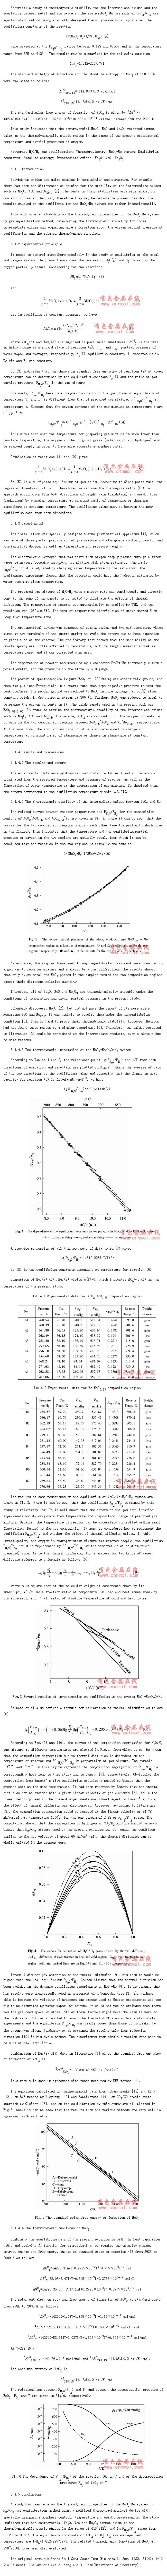 A Study on Thermodynamic Properties in the System MoO2-Mo by Gas Equilibration Method*